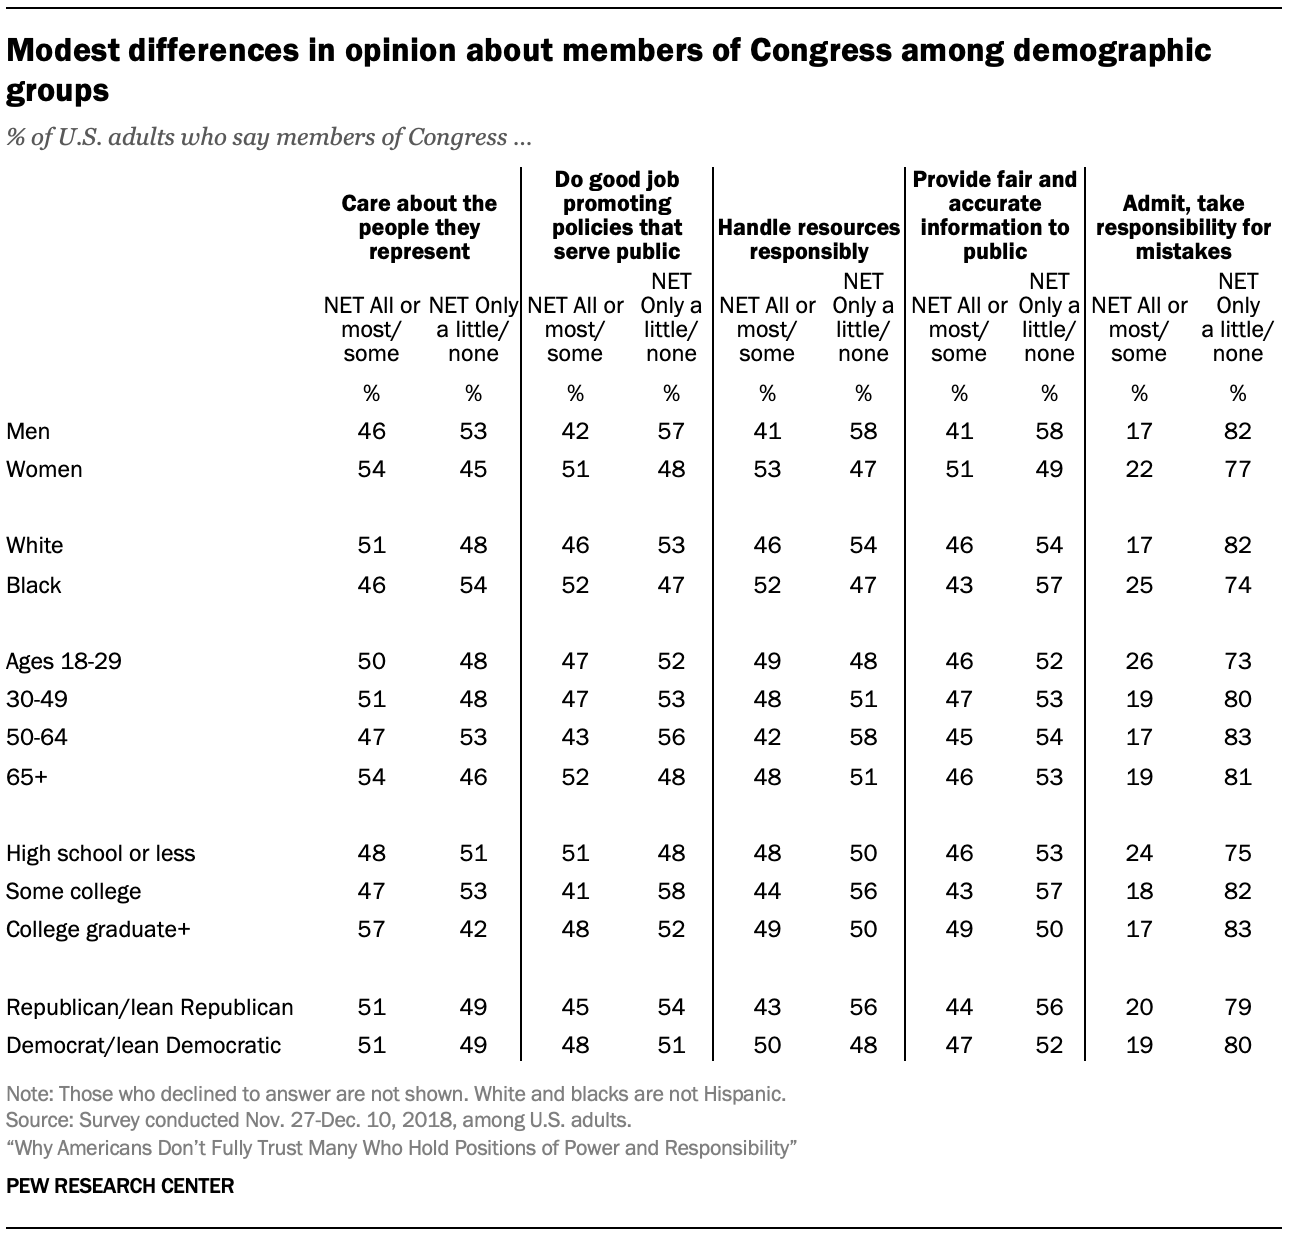 Modest differences in opinion about members of Congress among demographic groups